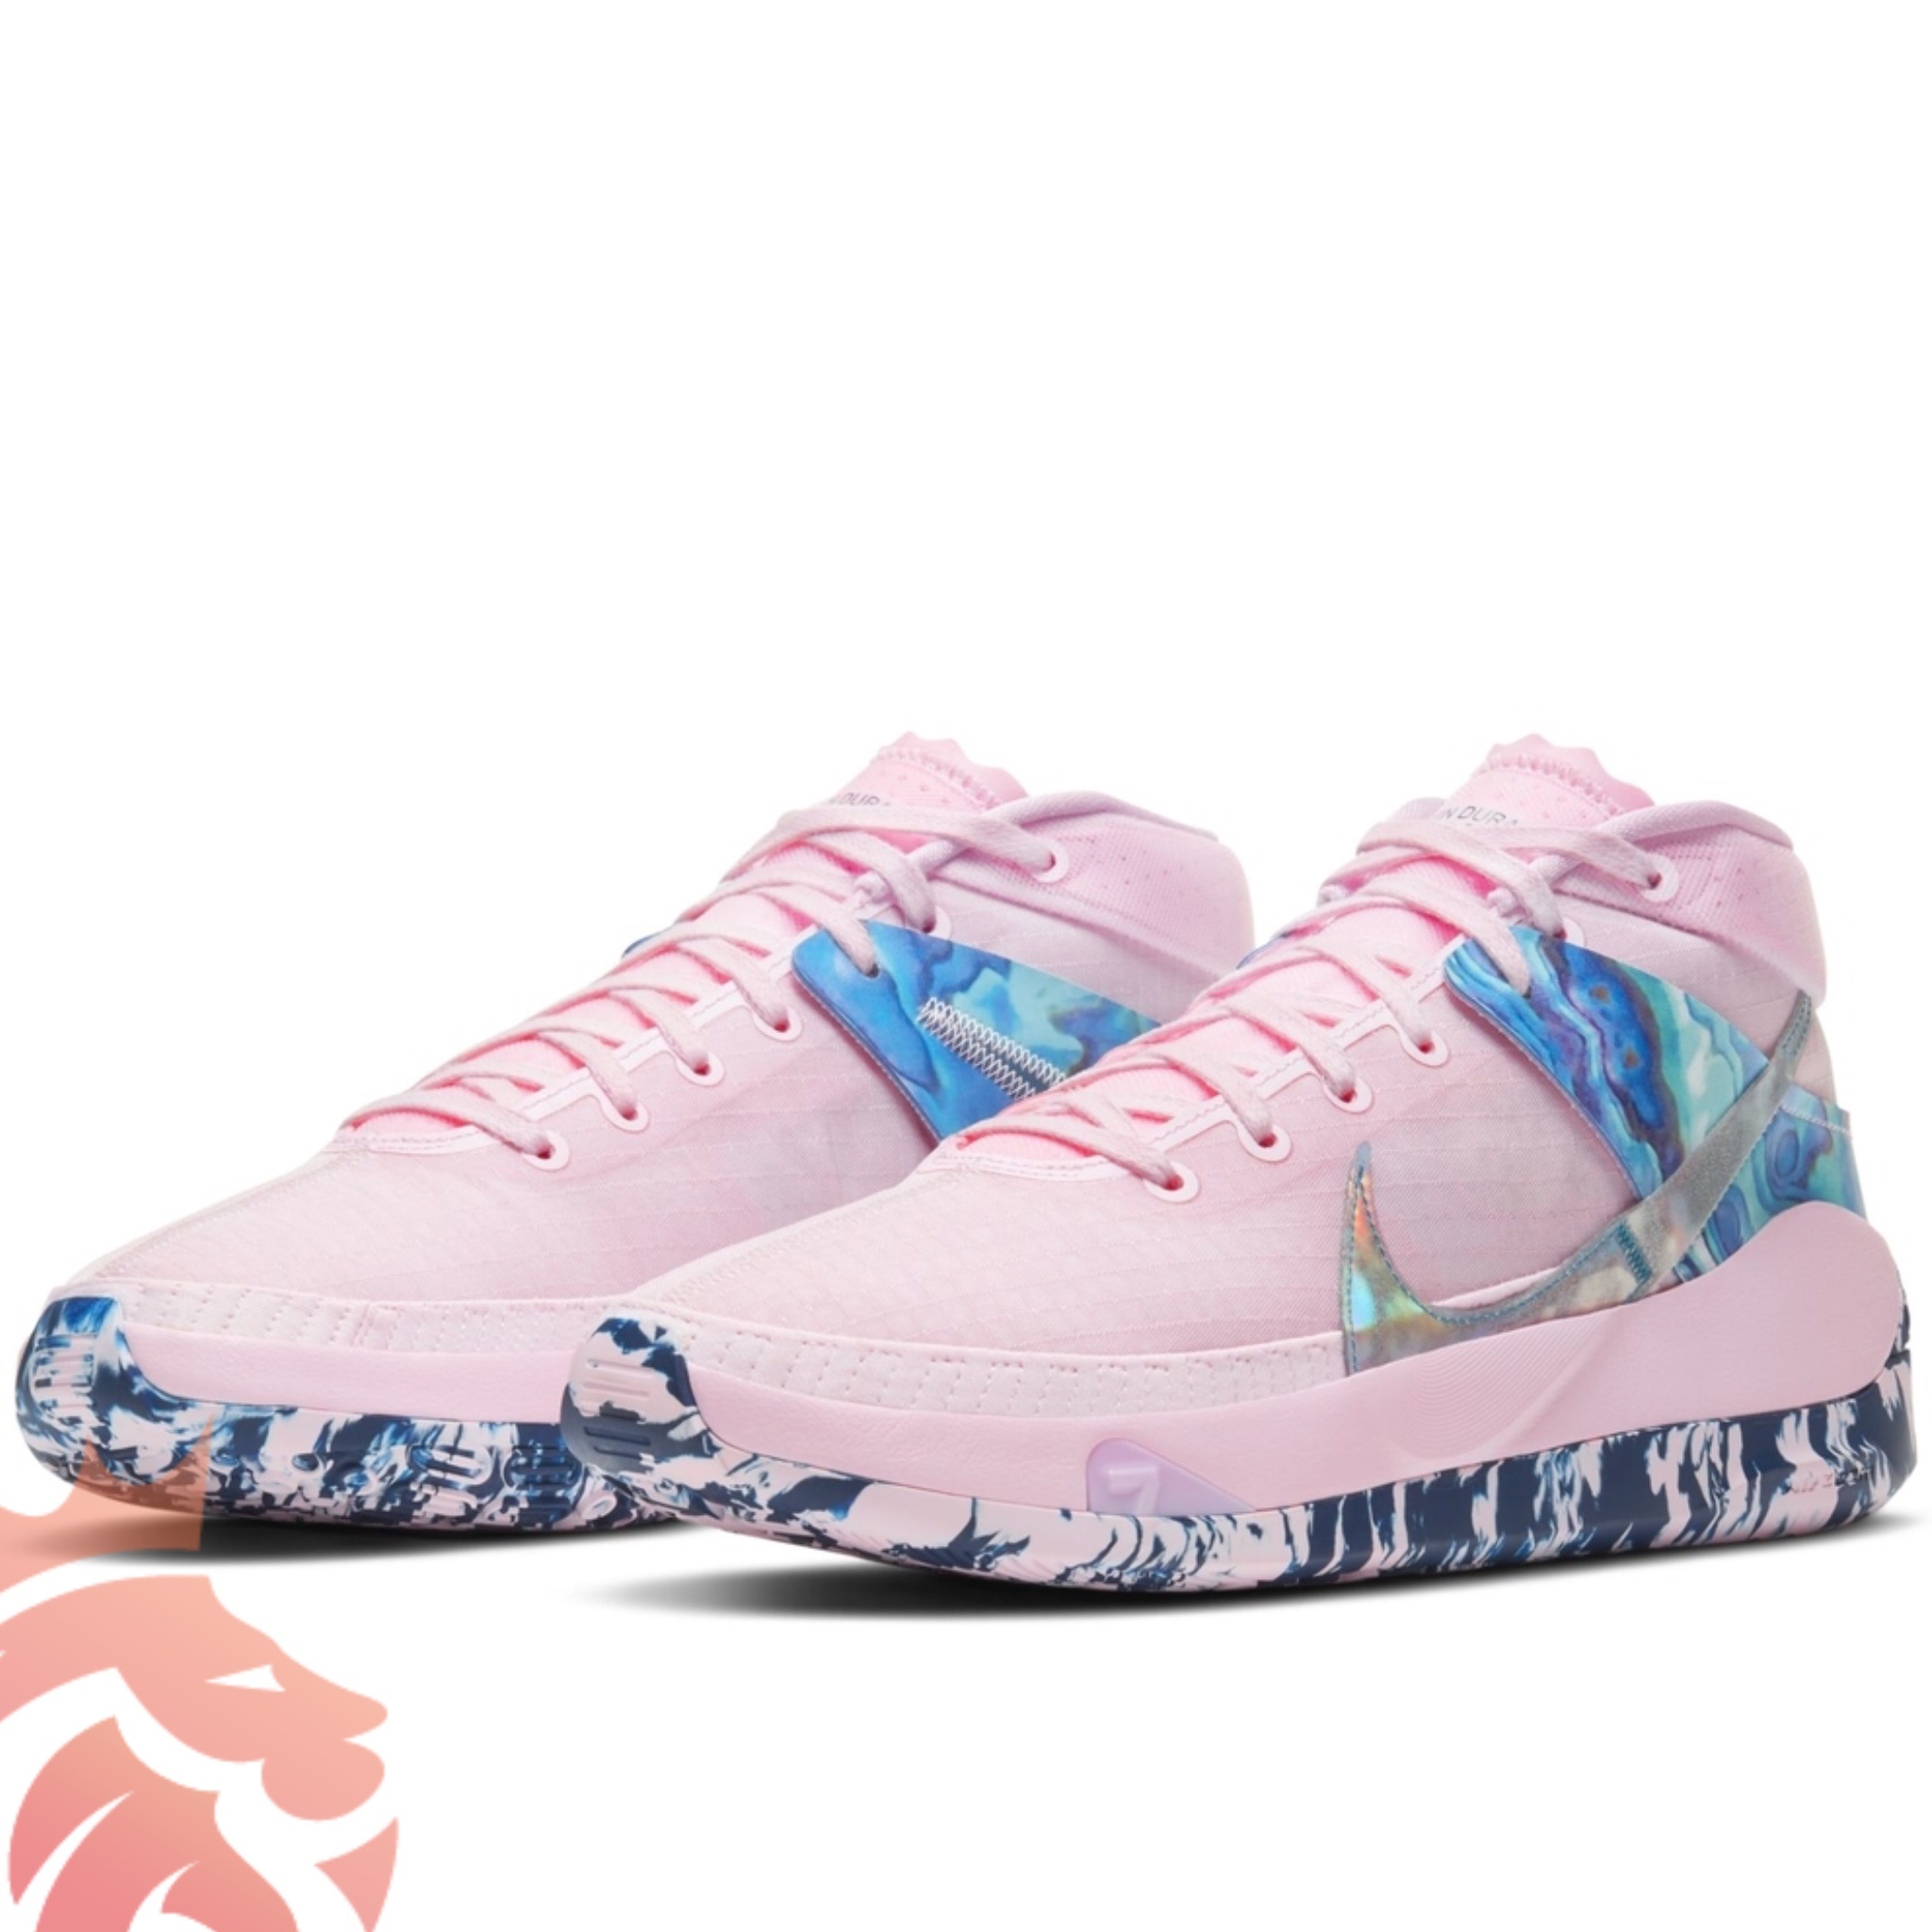 Nike Kevin Durant 13 Aunt Pearl DC0011-600 Pink Foam/Blue Void/Light Arctic Pink